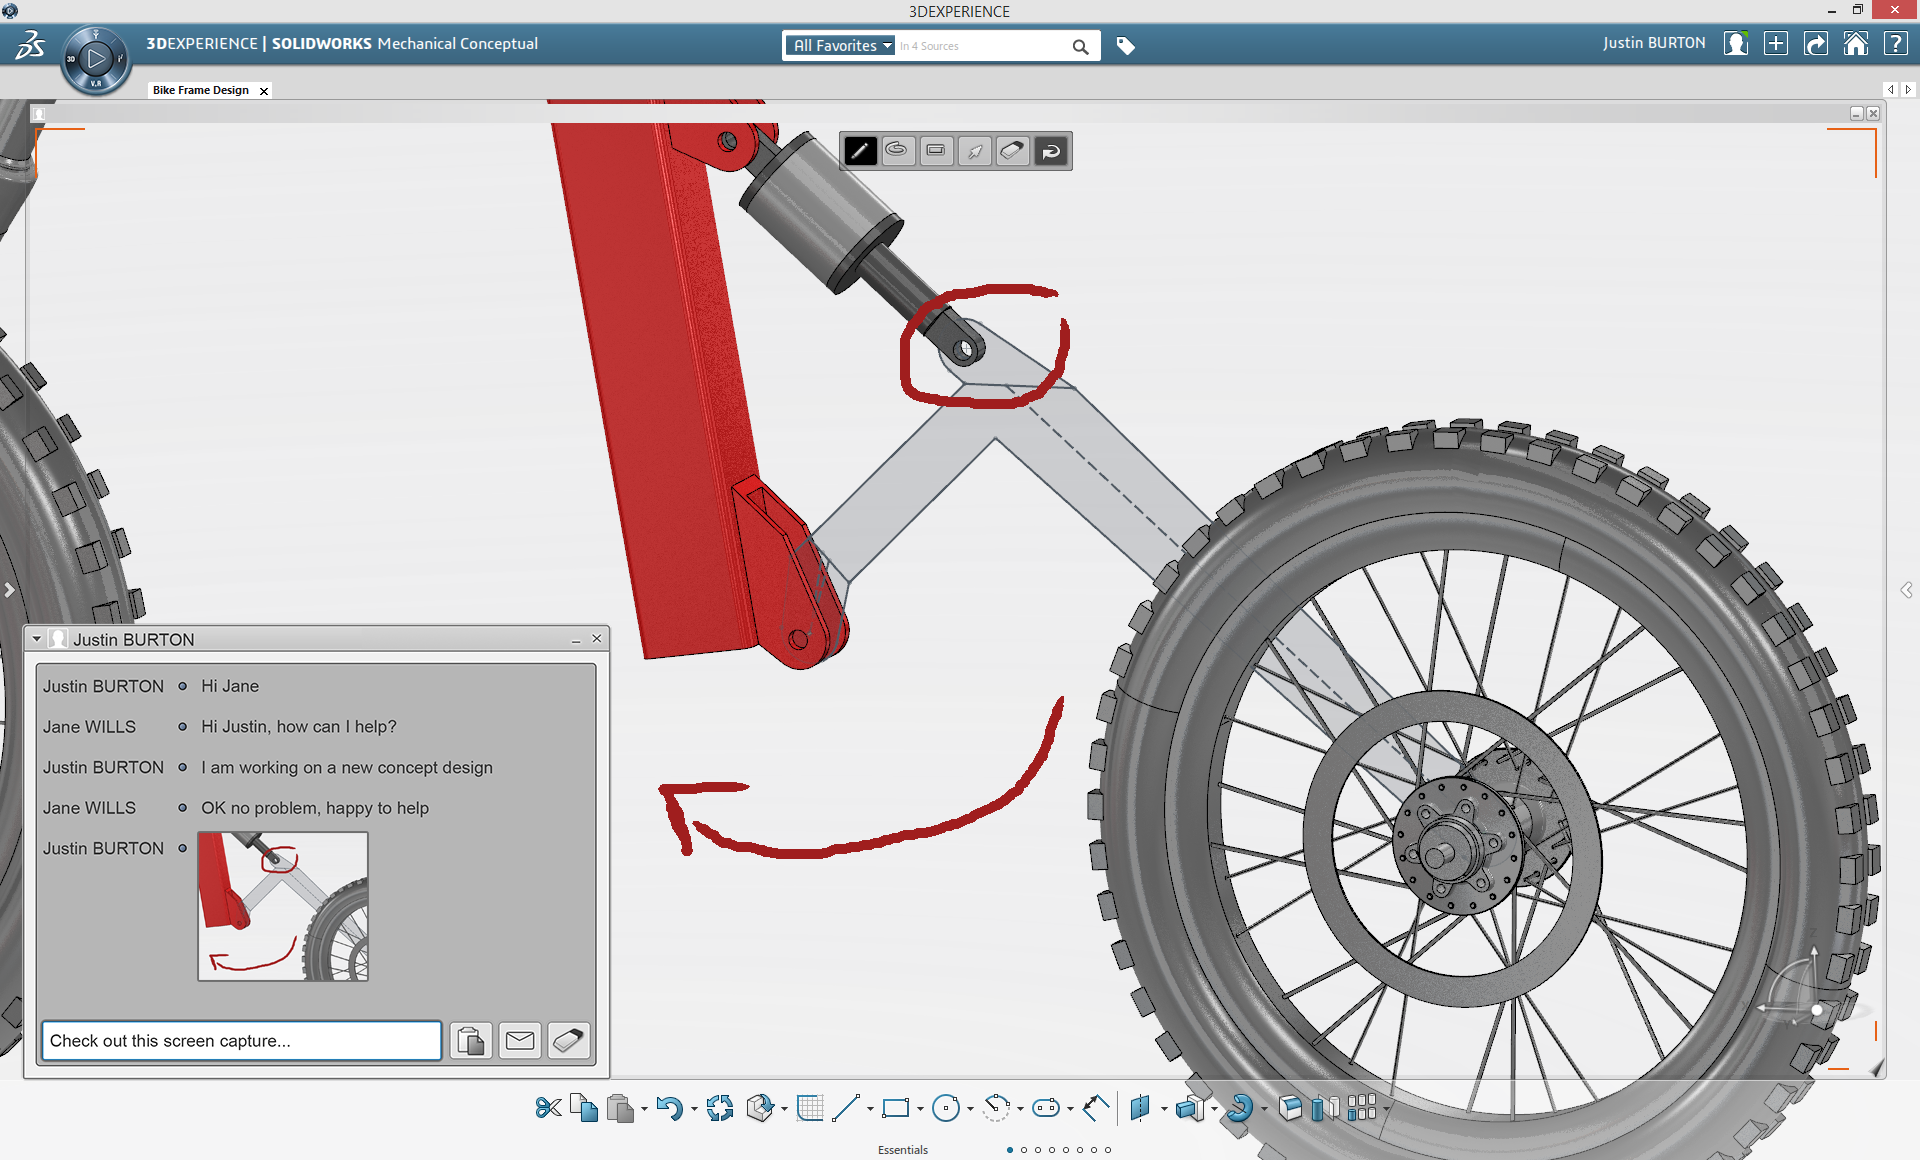 SolidWorks Mechanical Conceptual: The New Way to Tackle Concept Design Problems